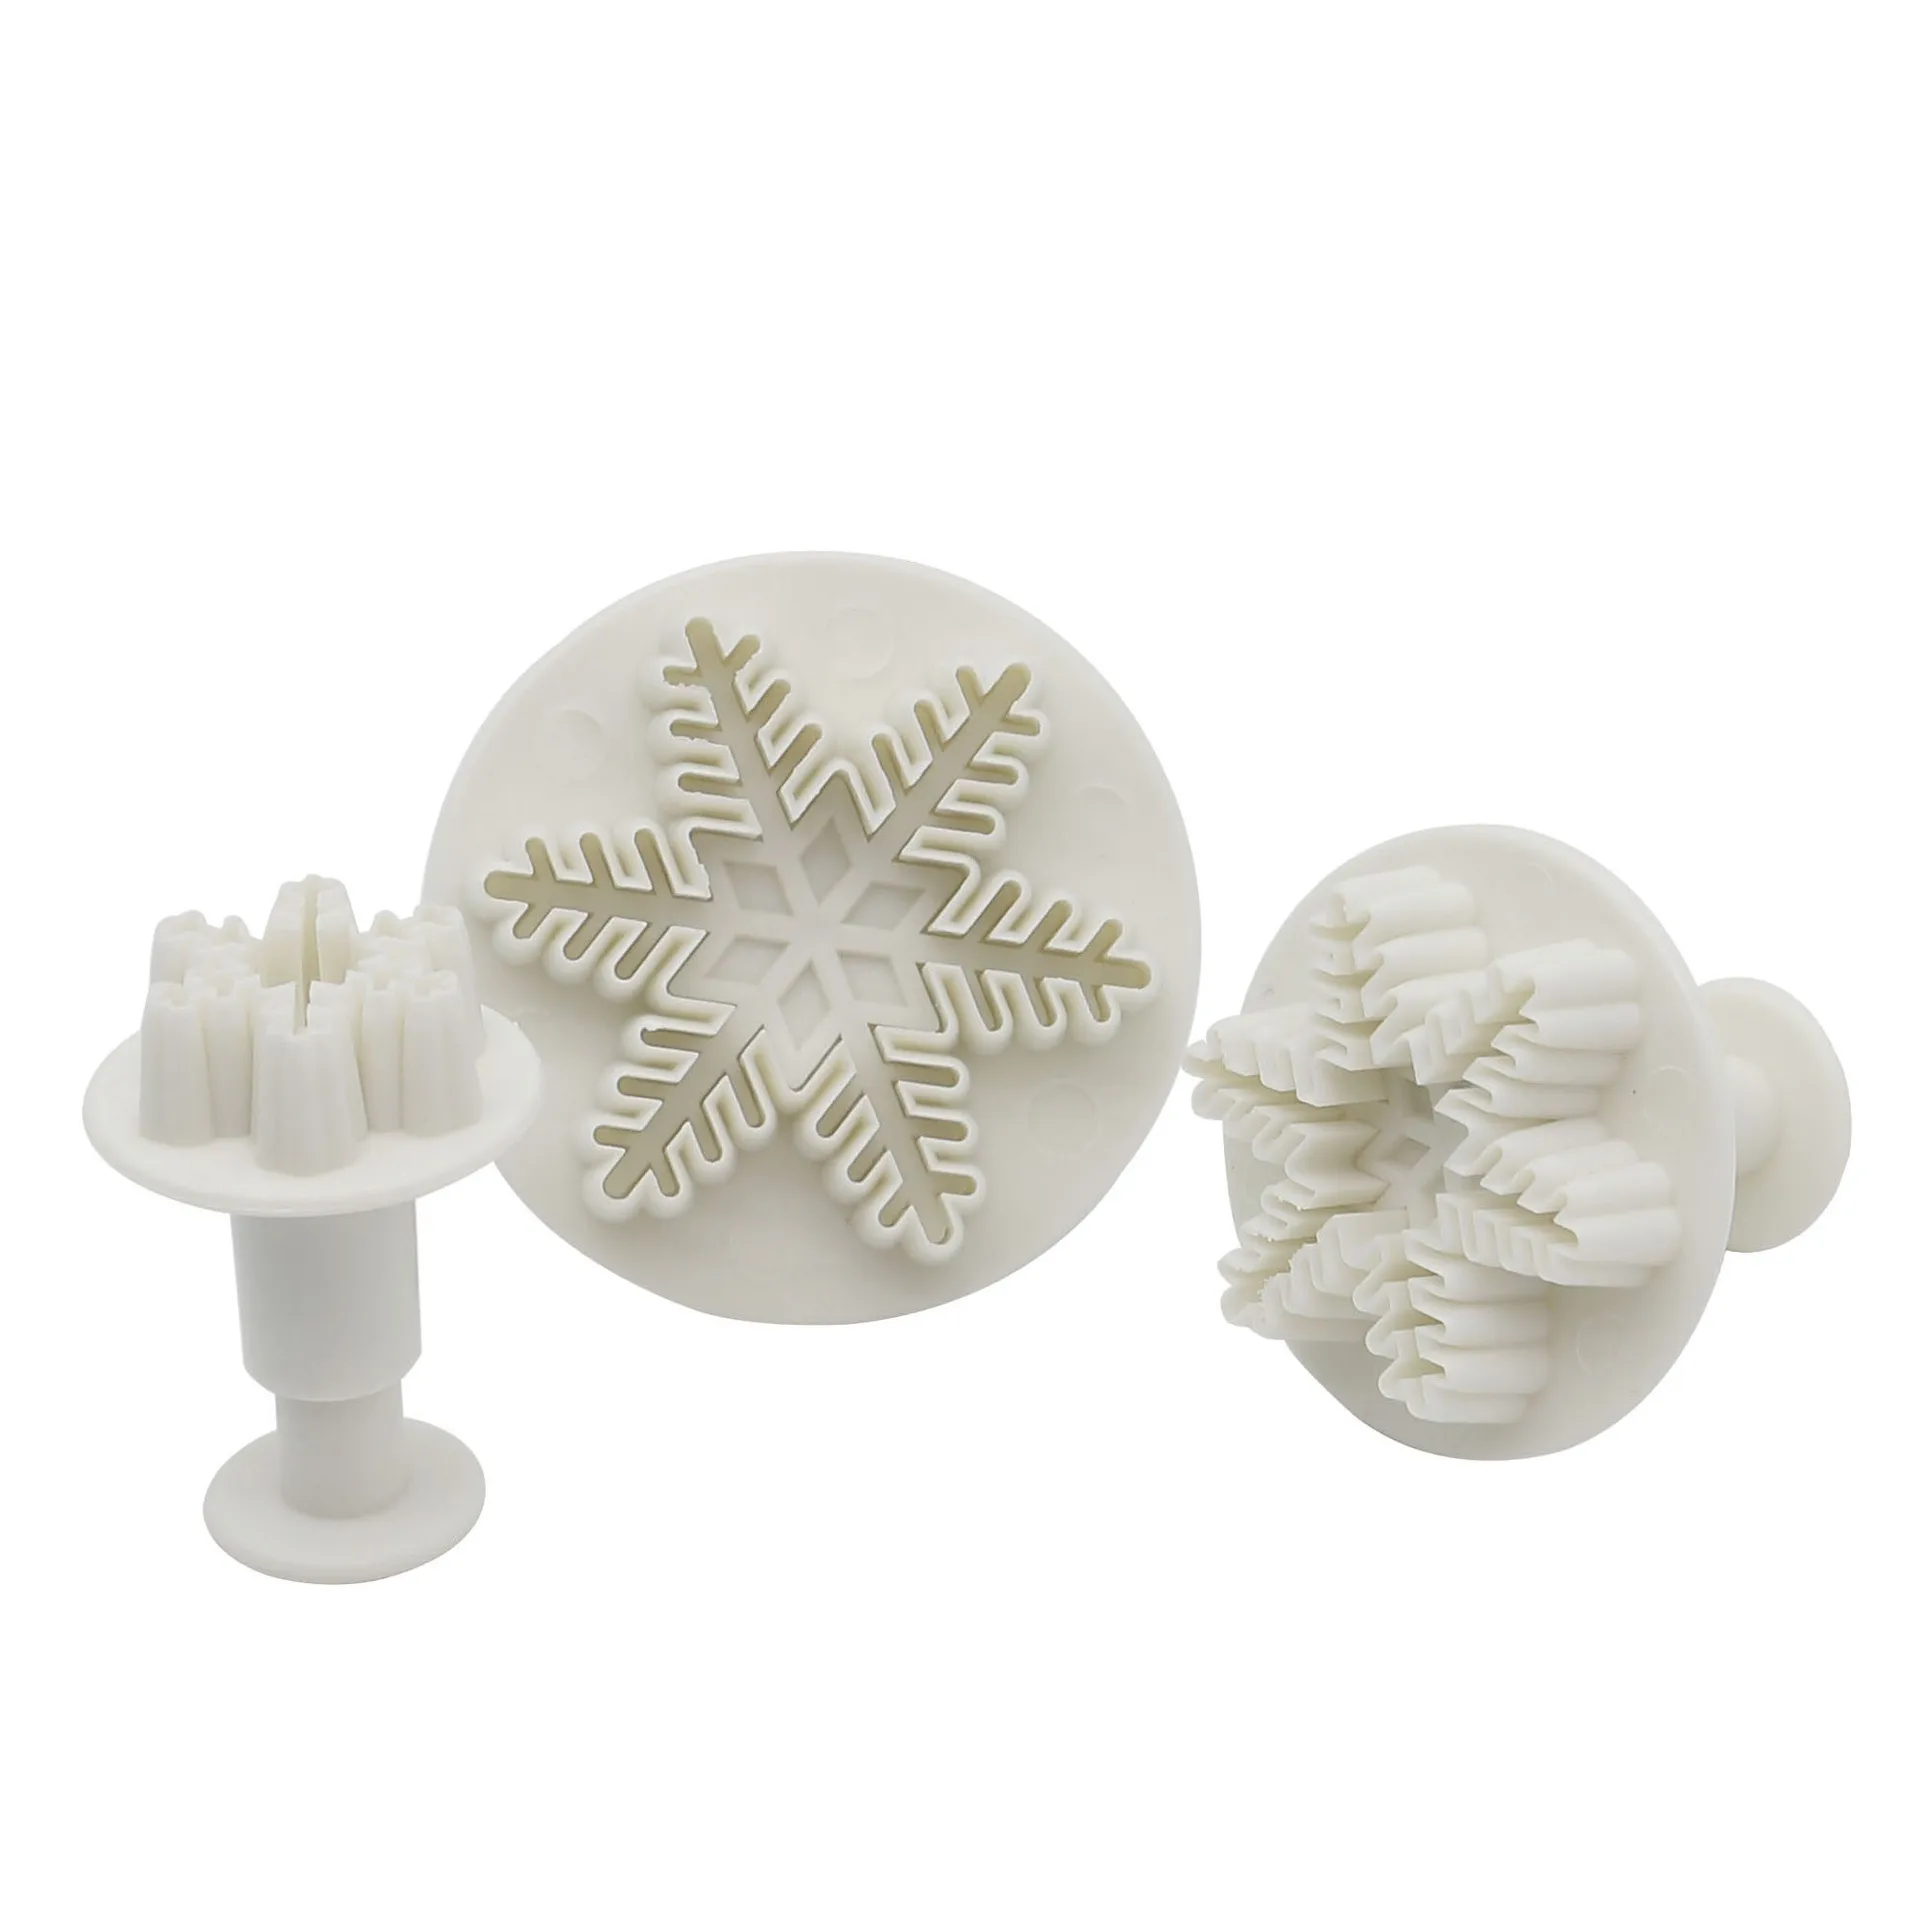 

Christmas snowflake cookies biscuit mold fondant sugarcraft plunger cookie cutters Xams Snow cupcake cake decorating tool